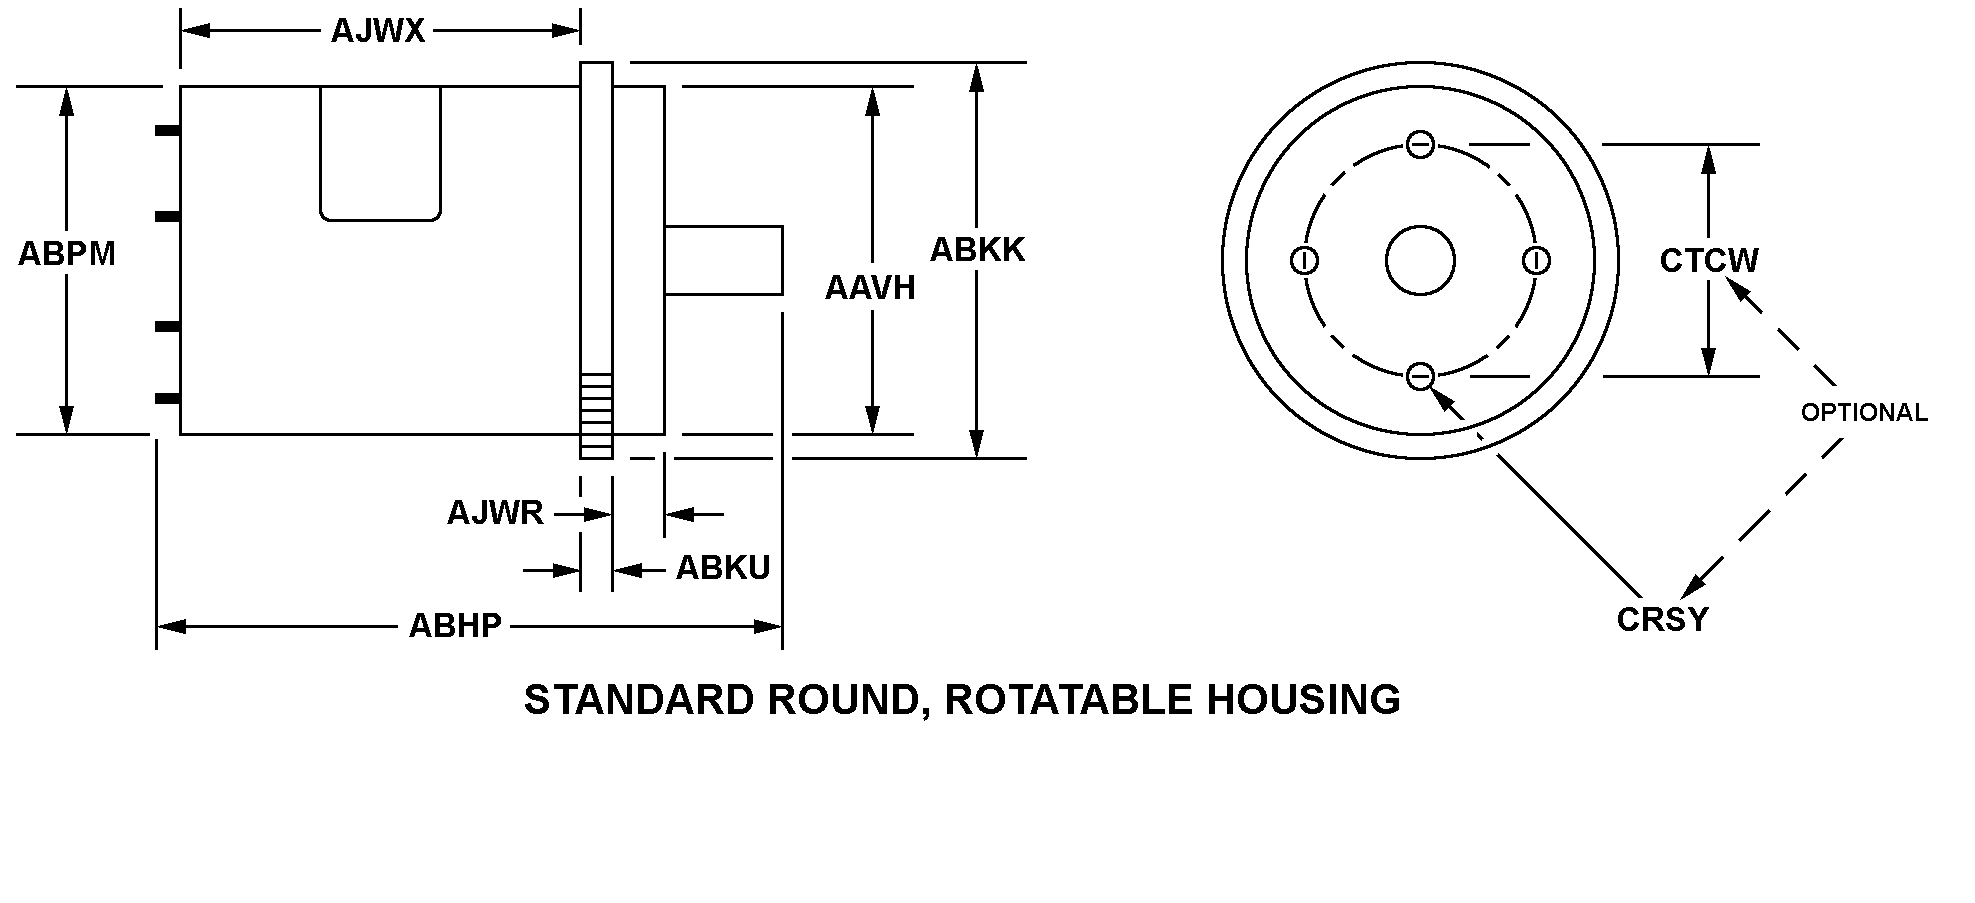 STANDARD ROUND, ROTATABLE HOUSING style nsn 5990-01-233-4178